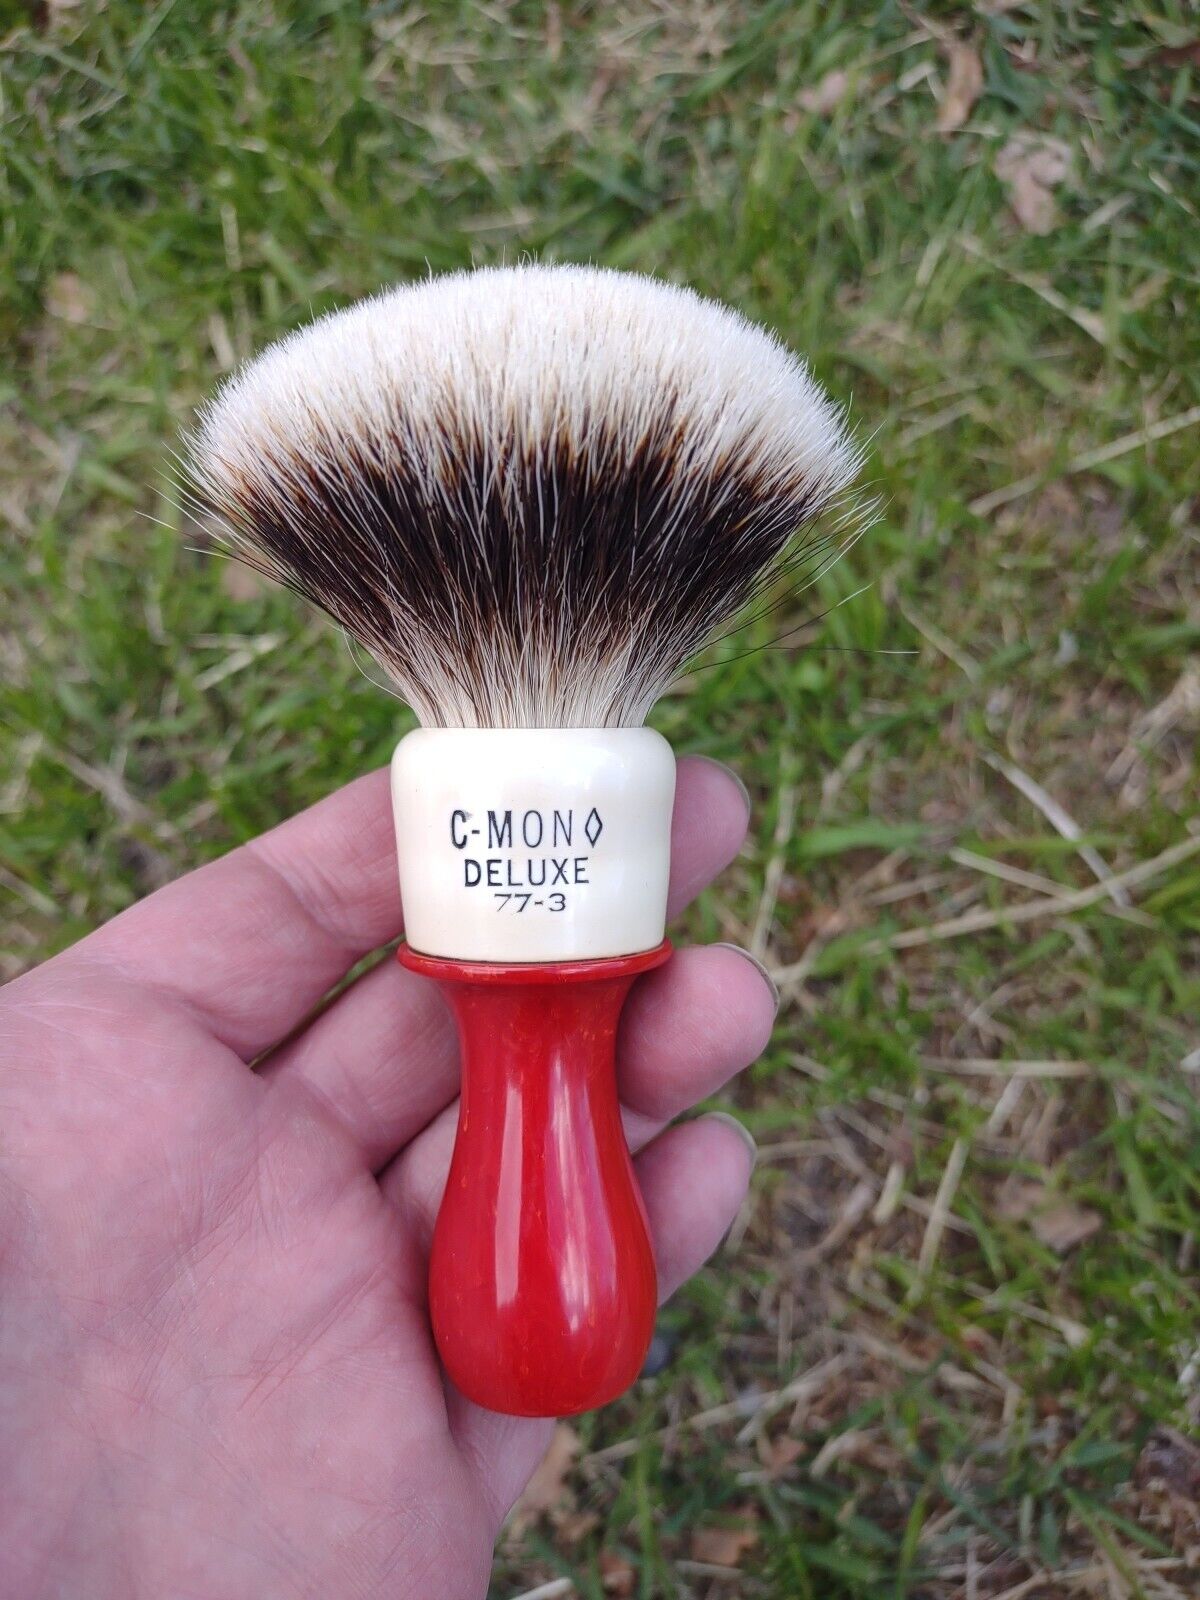 Vintage Rare C-mon Shave Brush With A New 25mm EHD Two Band Badger Knot 